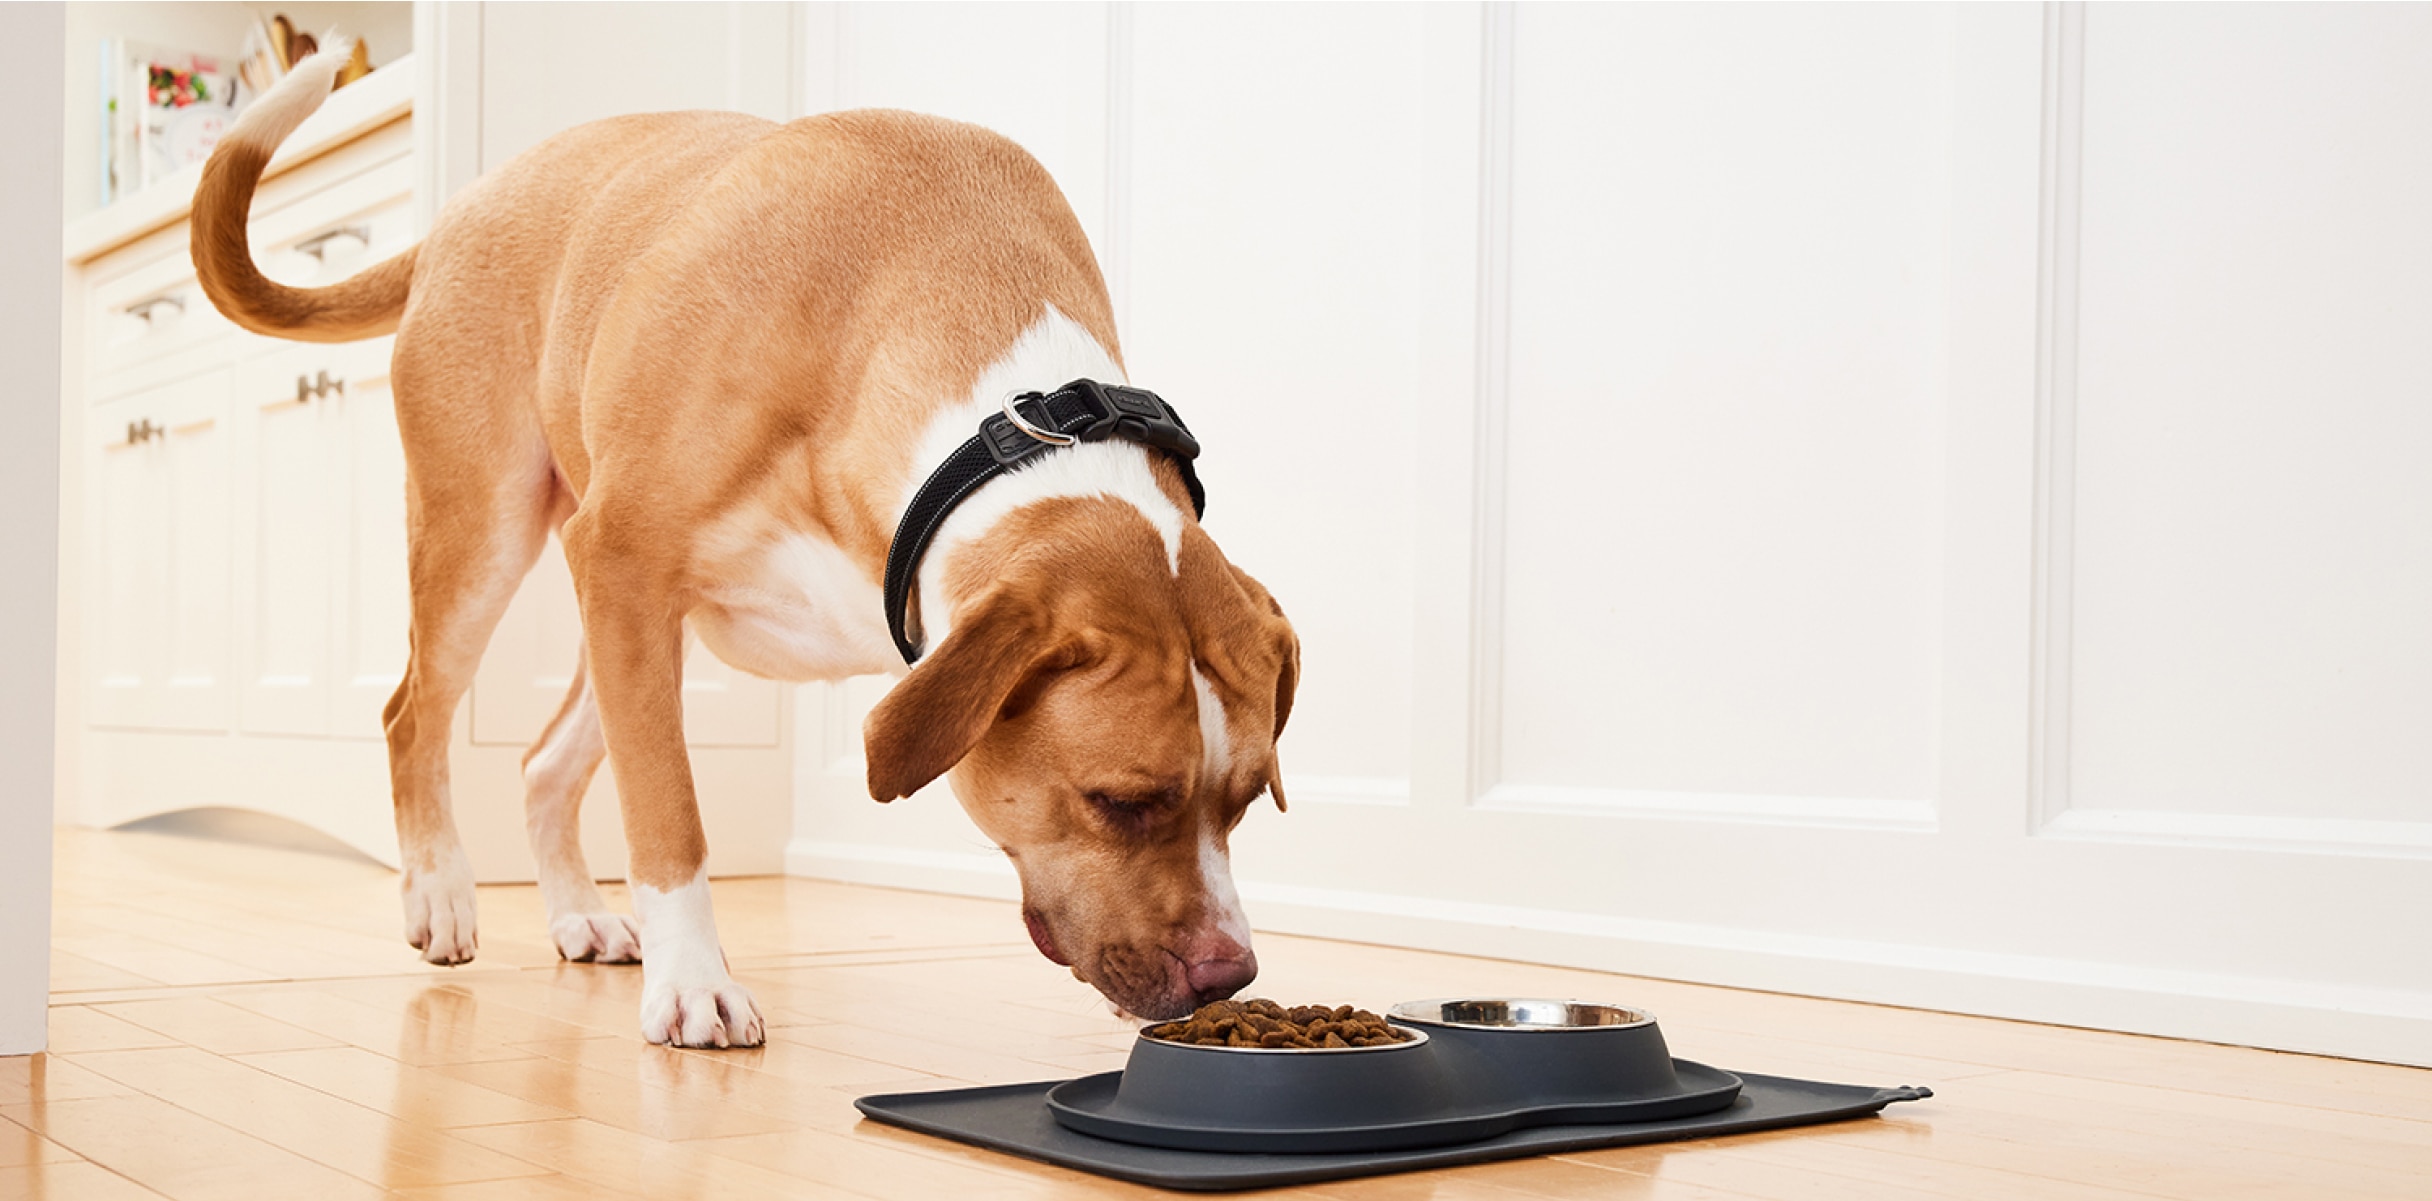 What exactly is my pet eating - A dog eating dry food